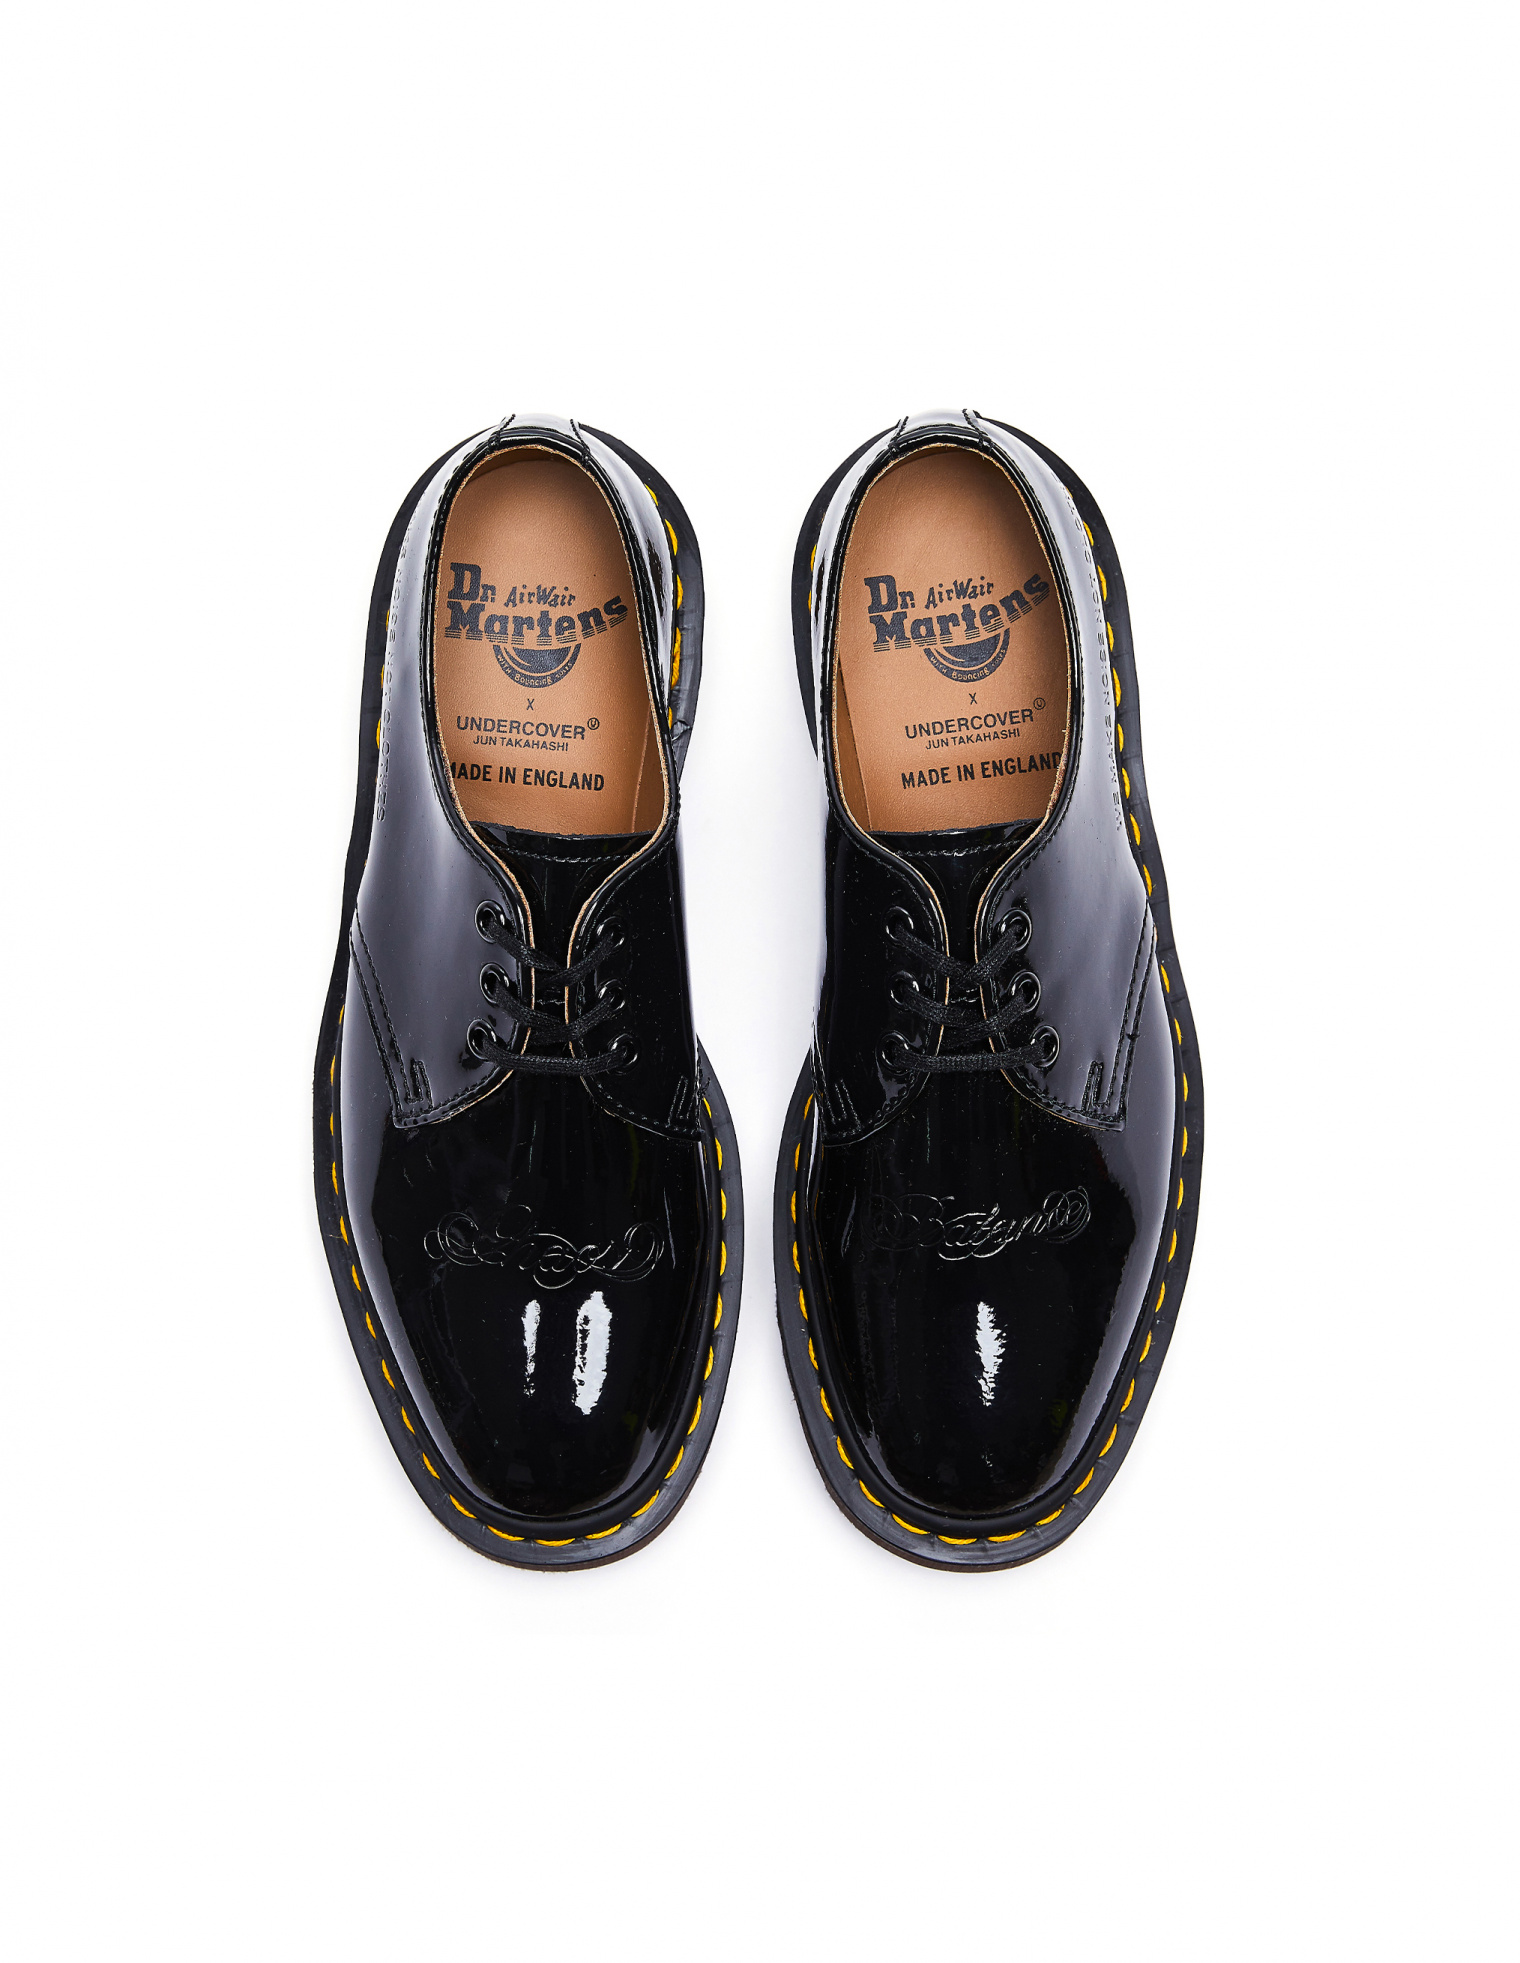 Undercover Dr.Martens Black Patent Leather 1461 Boots